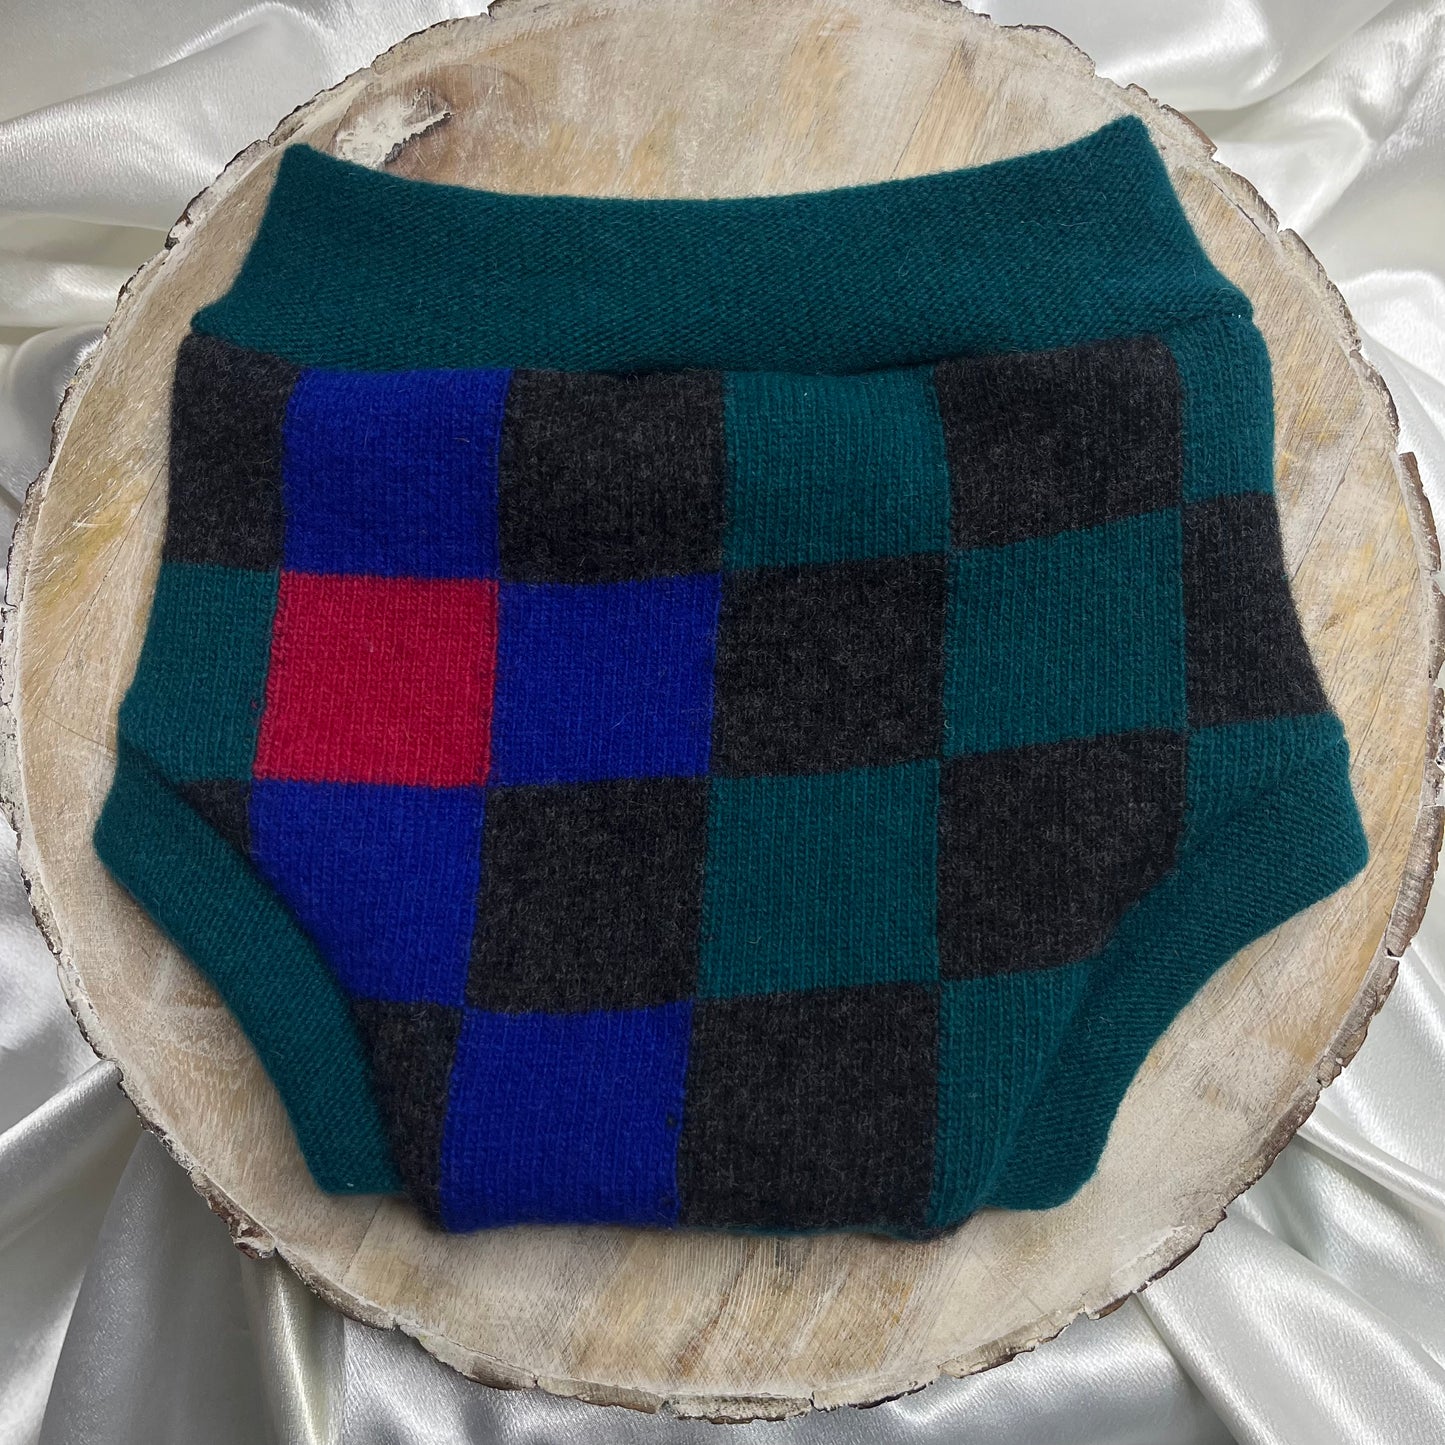 Upcycled Wool Cover - Size Medium - Teal w/ Stripes & Checks